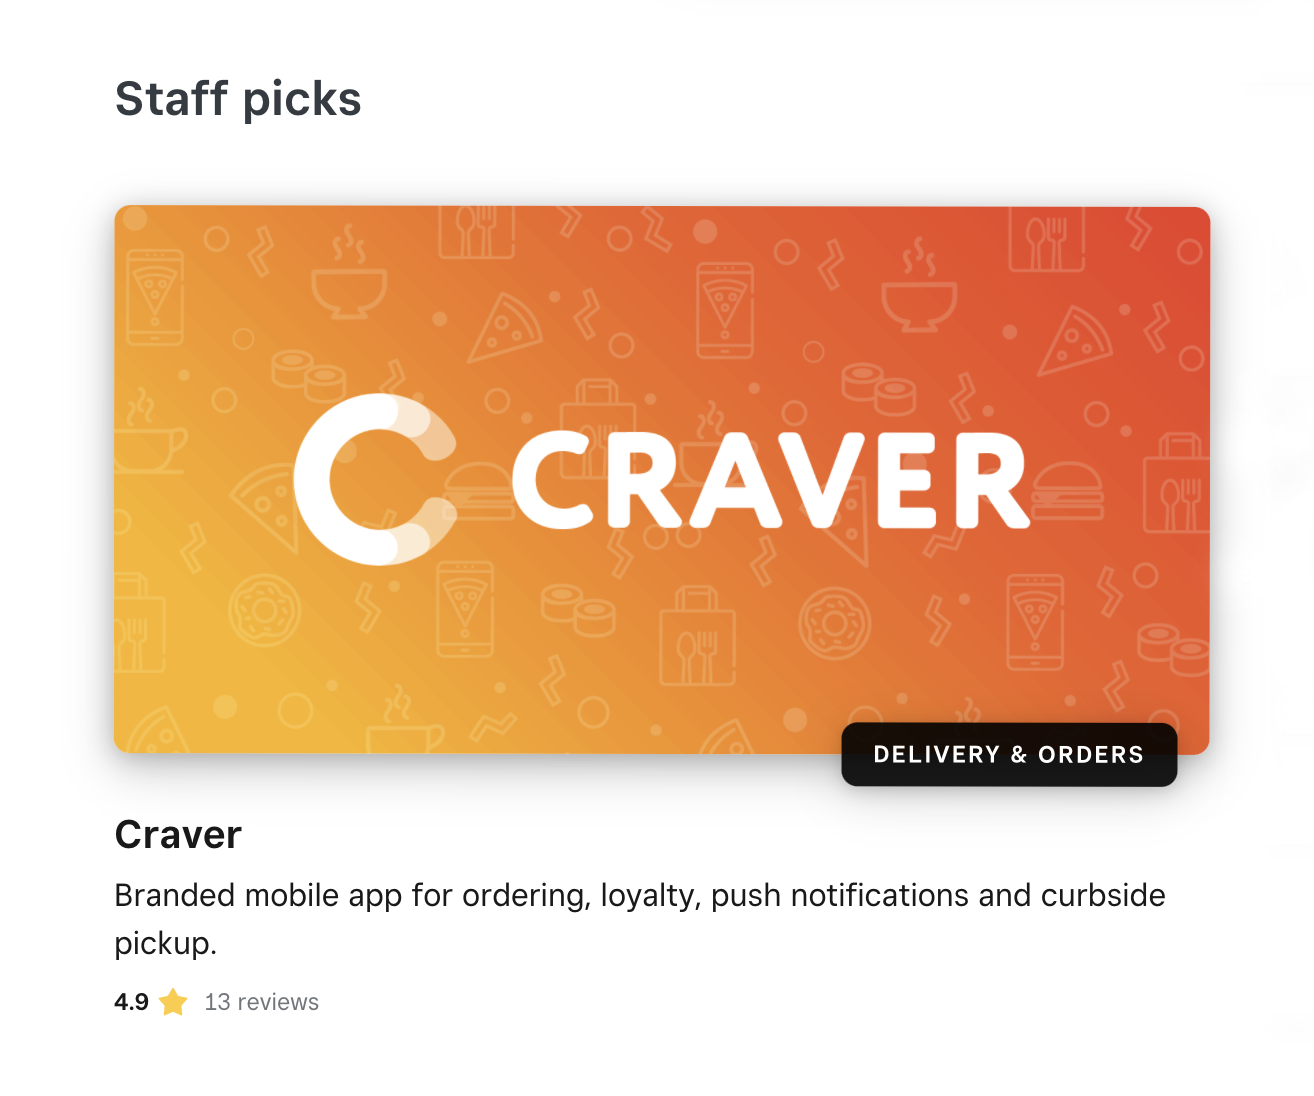 The Craver logo on an orange background with the Square Marketplace Staff picks screen showing